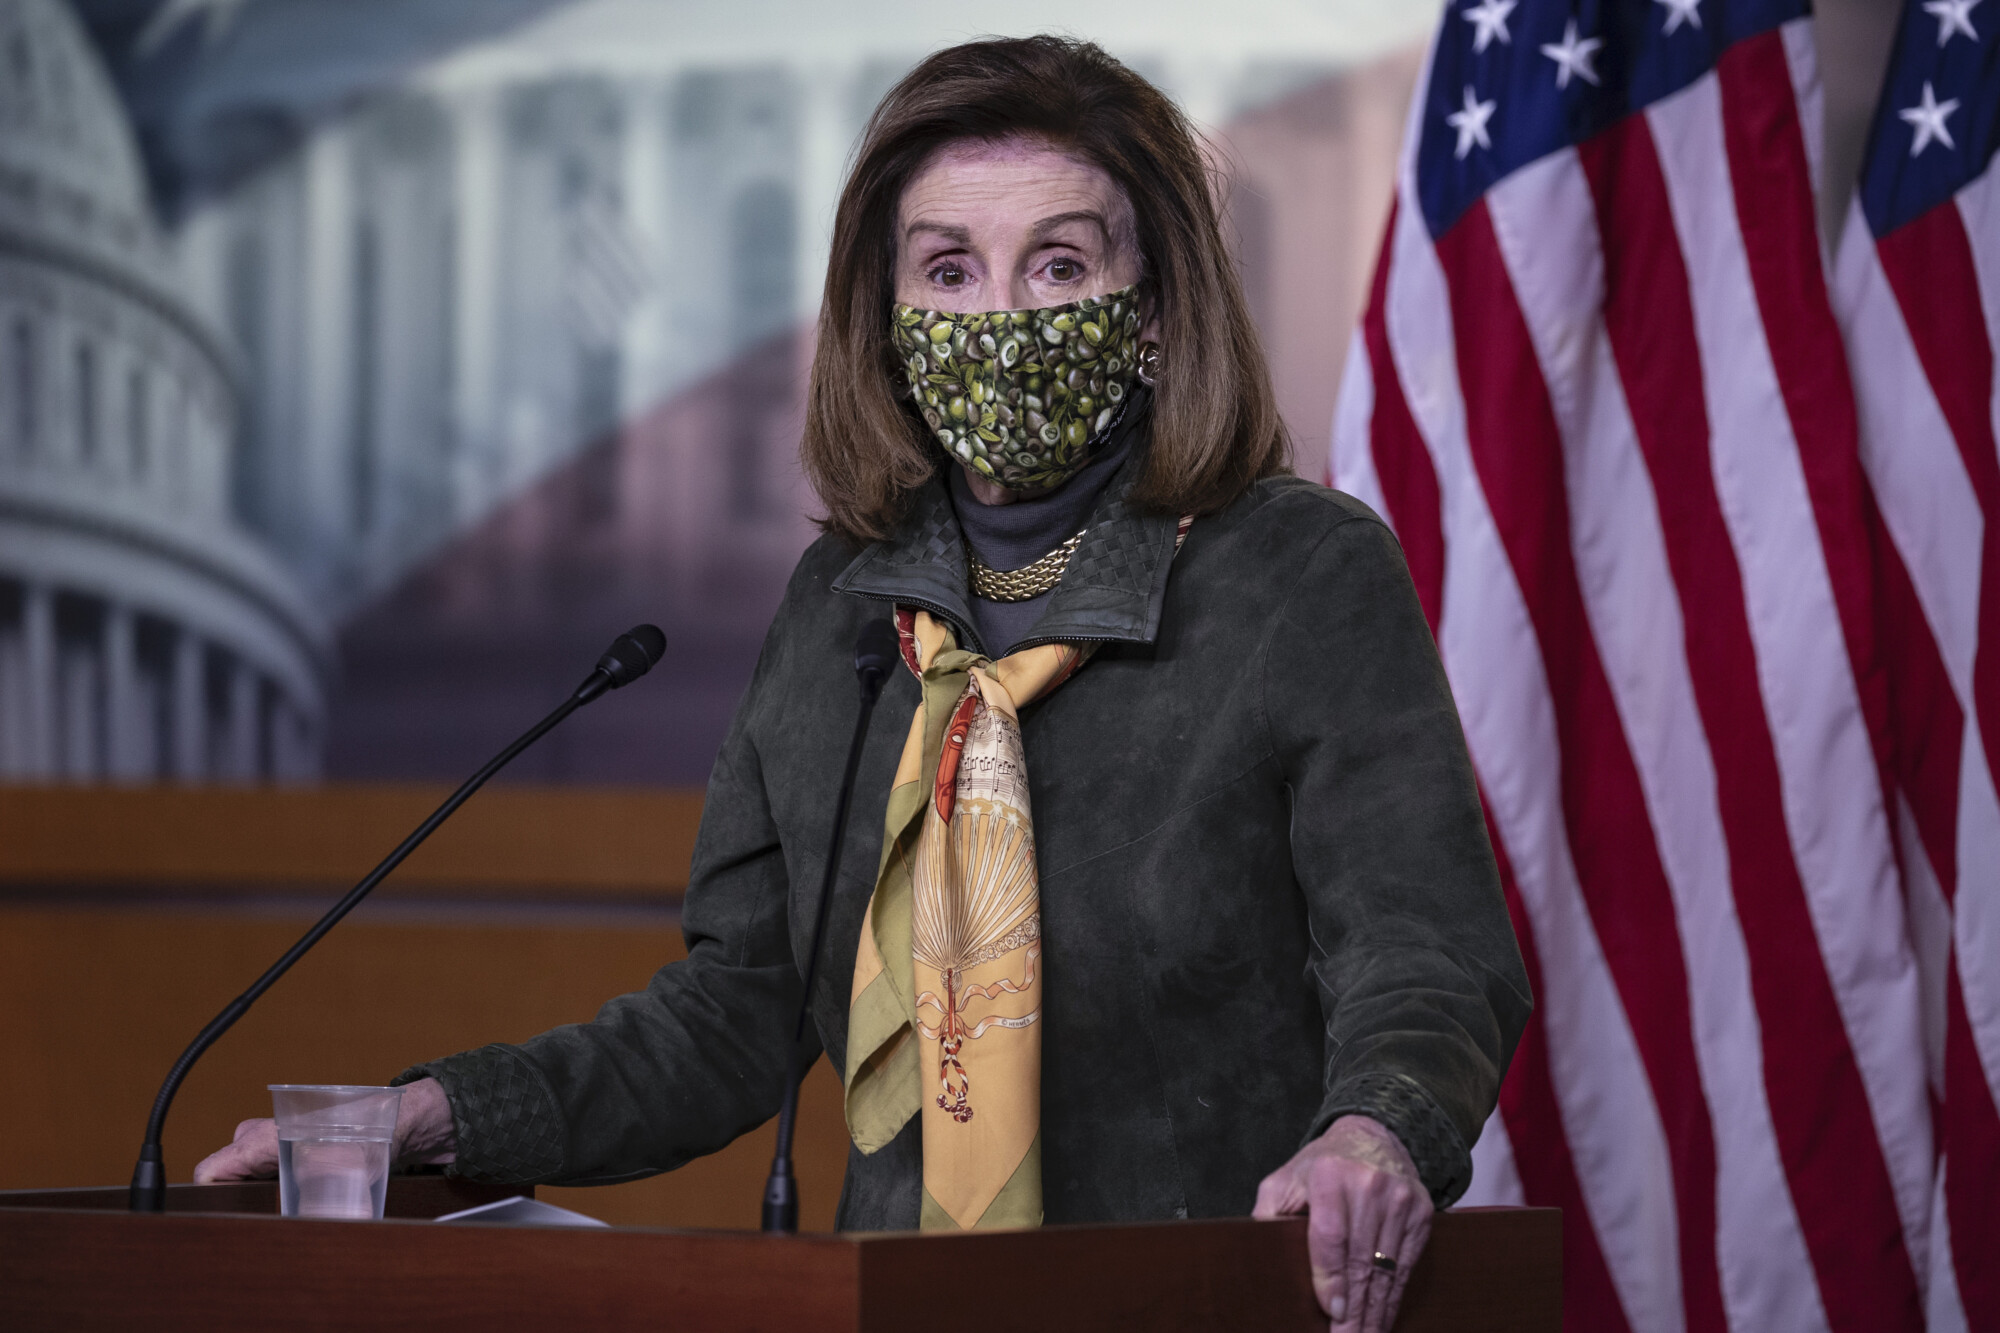 Pelosi: Speaking Up for Human Rights in China Is About ‘Honoring Our Values’